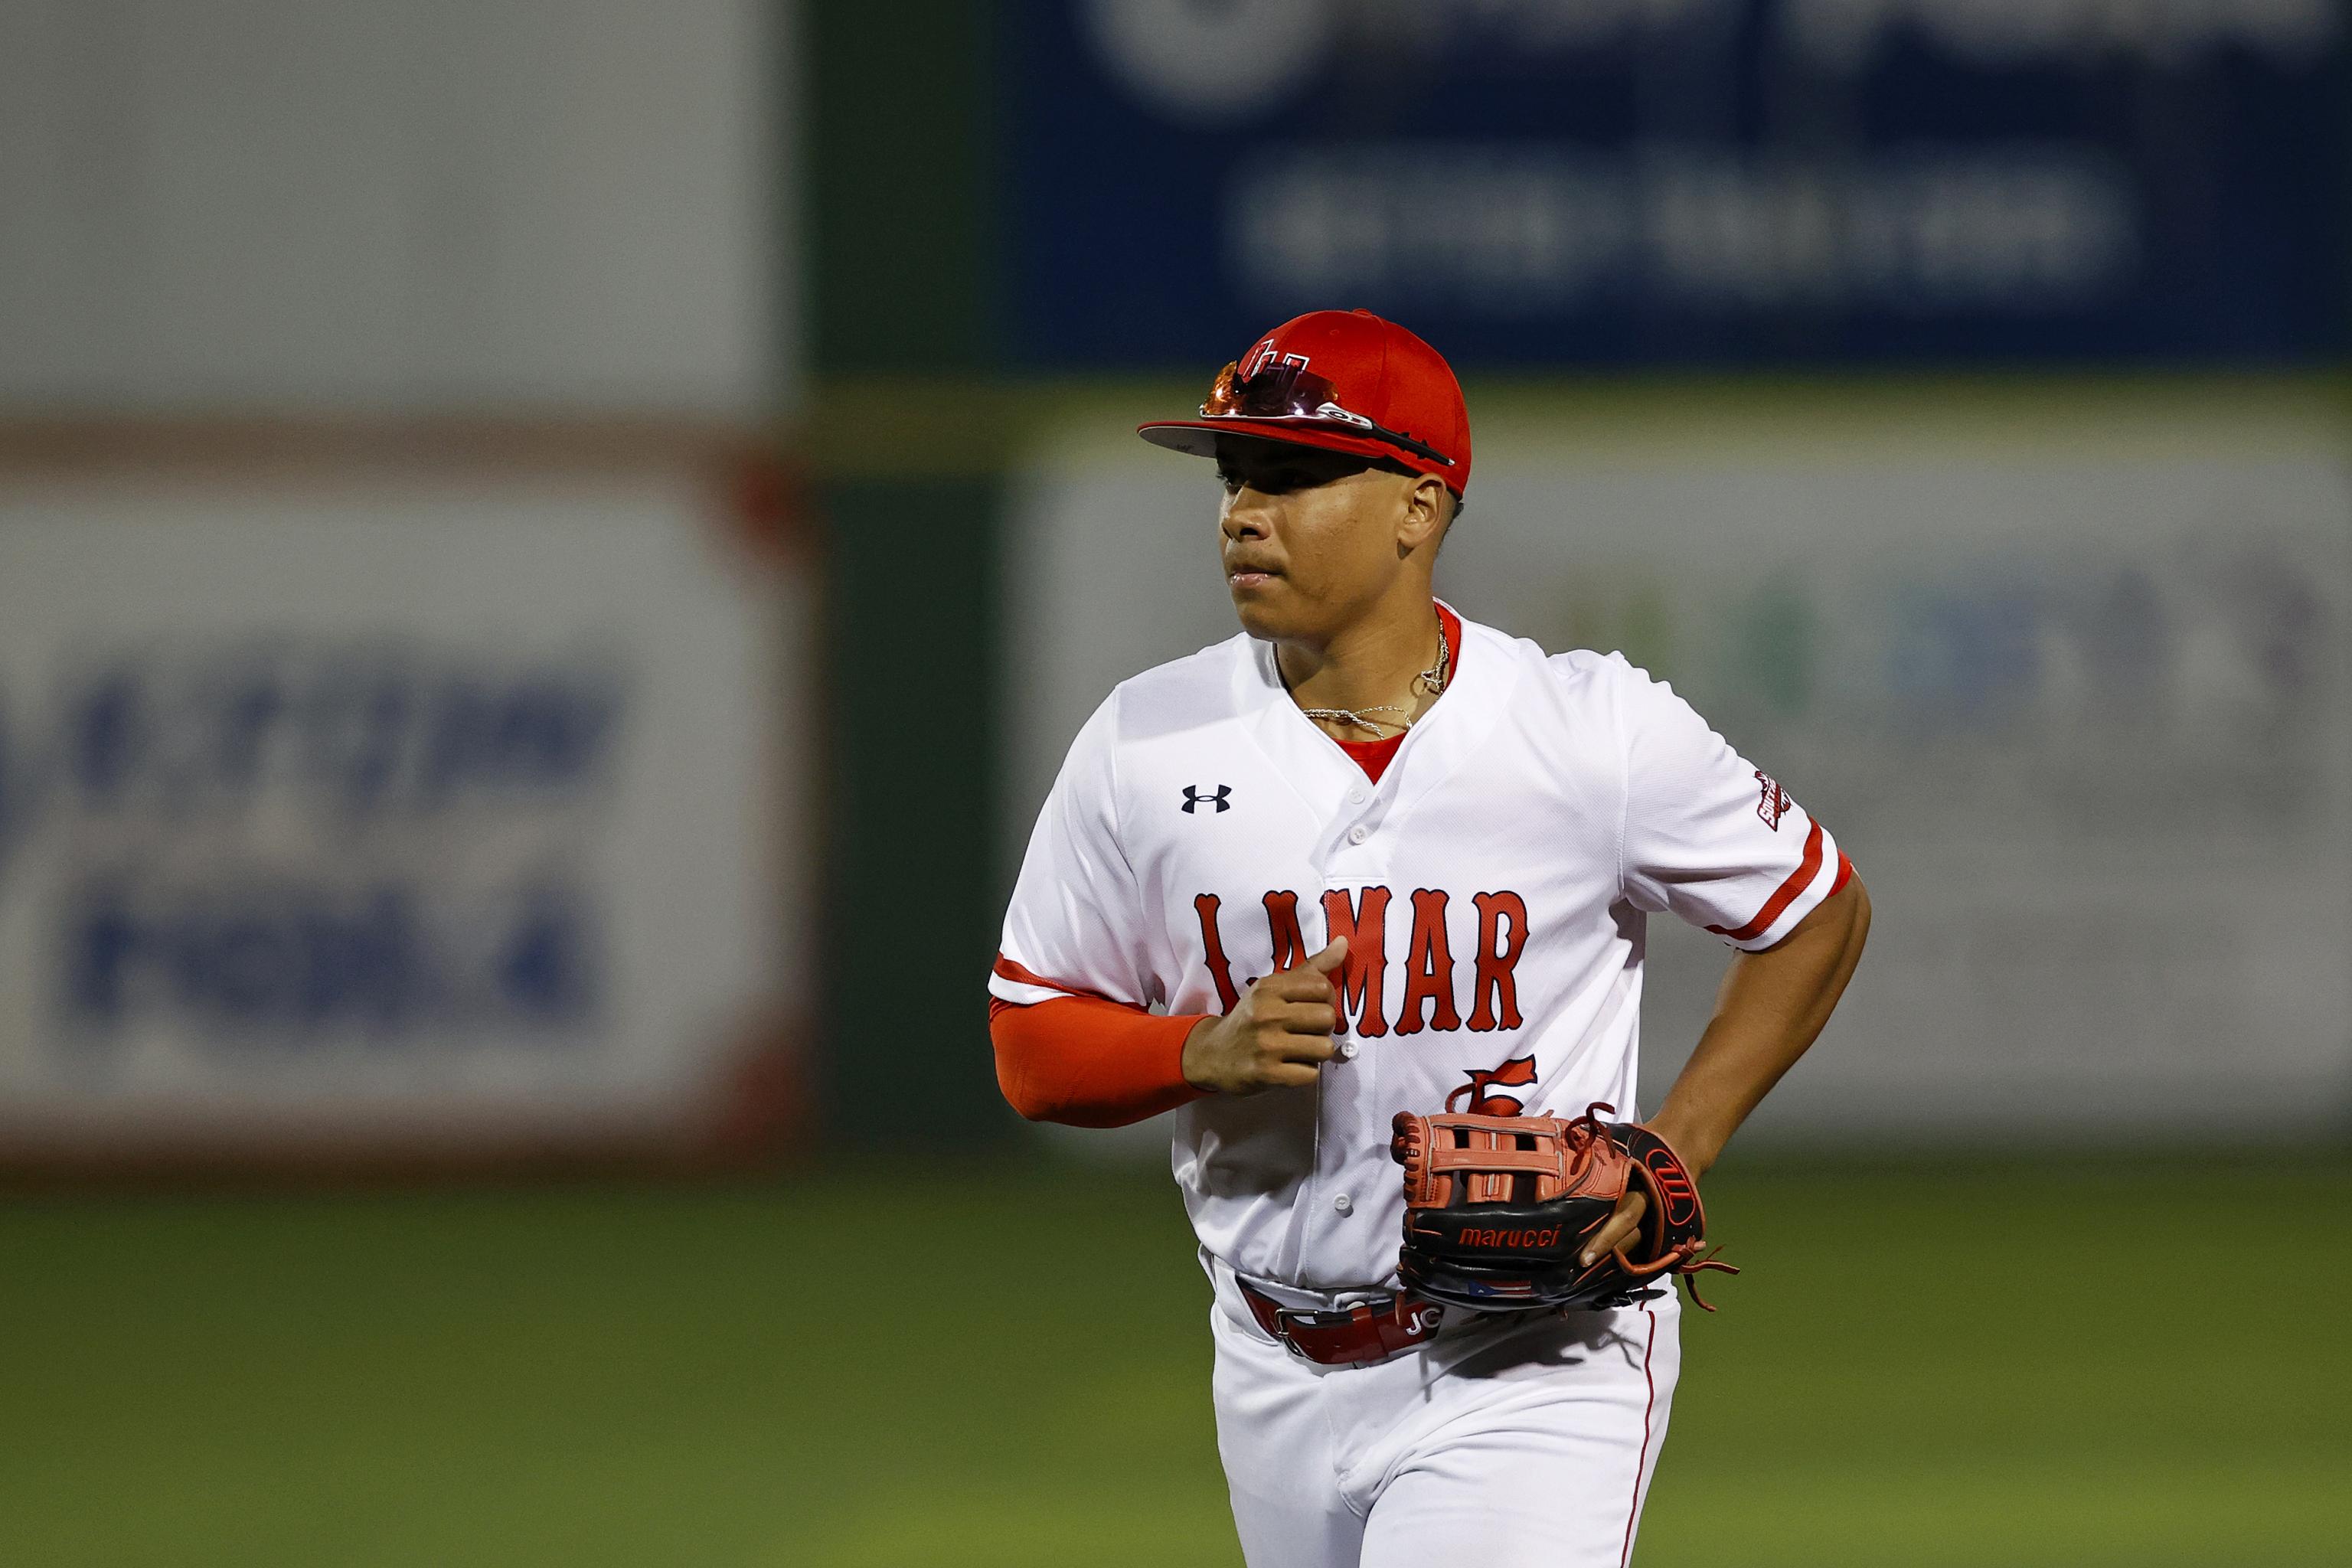 Carlos Correa's Brother J.C. Signing with Astros as Undrafted Free